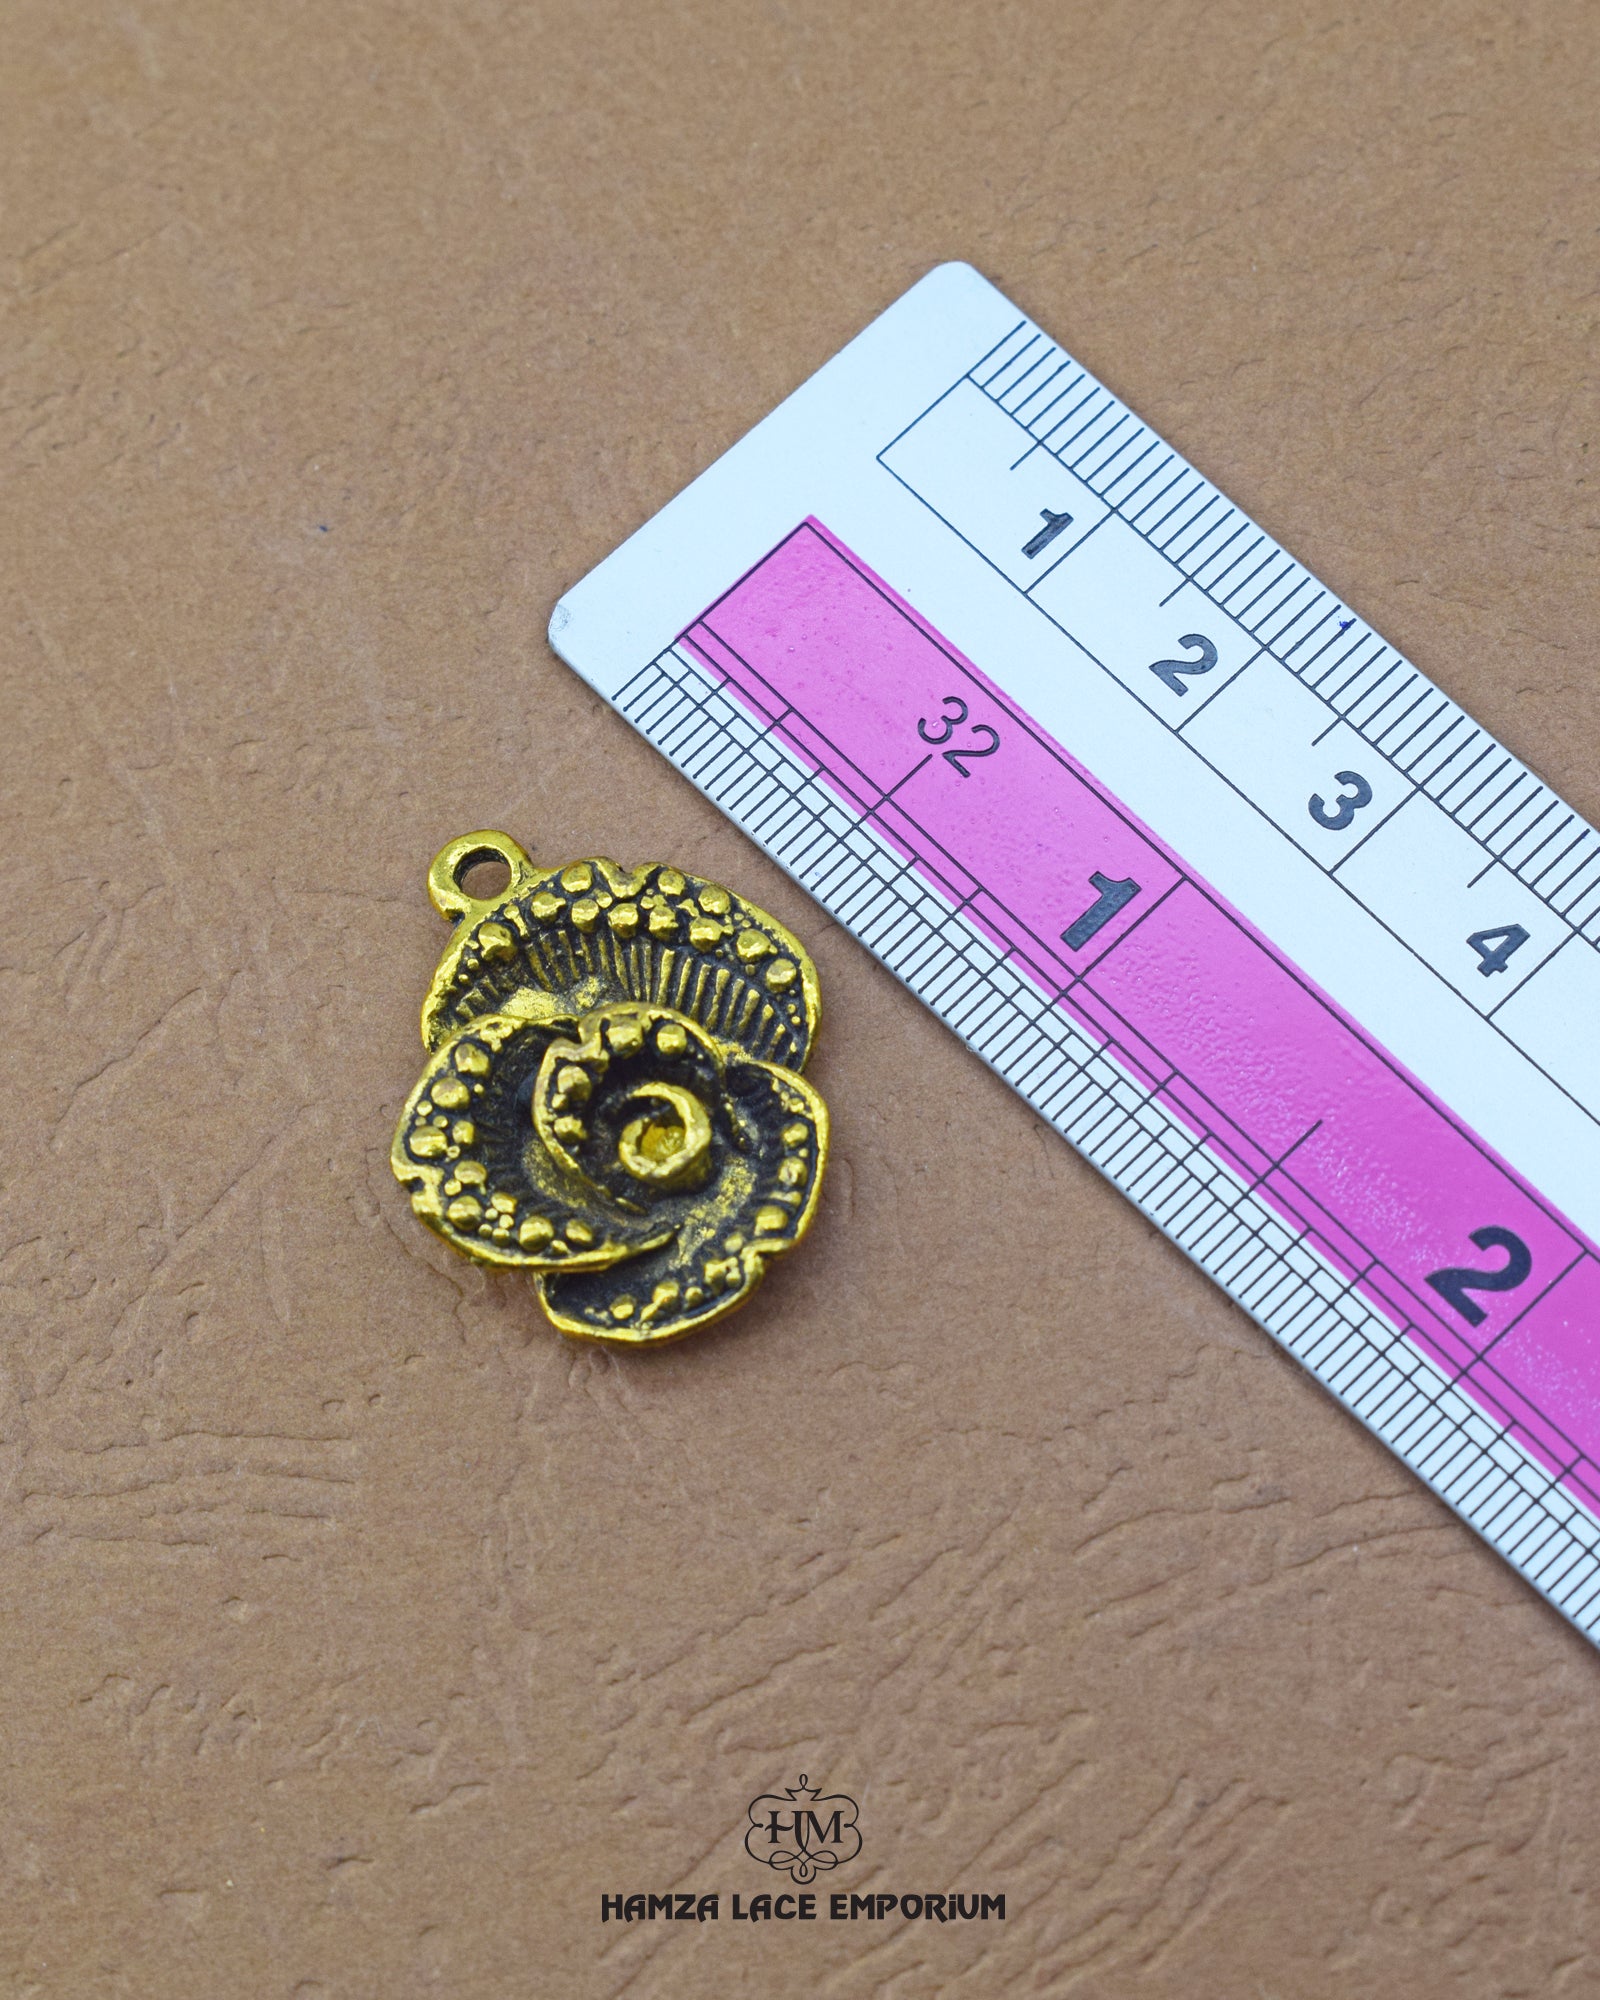 The 'Flower Design Metal Button MA681' size is showcased using a ruler for precise measurement.